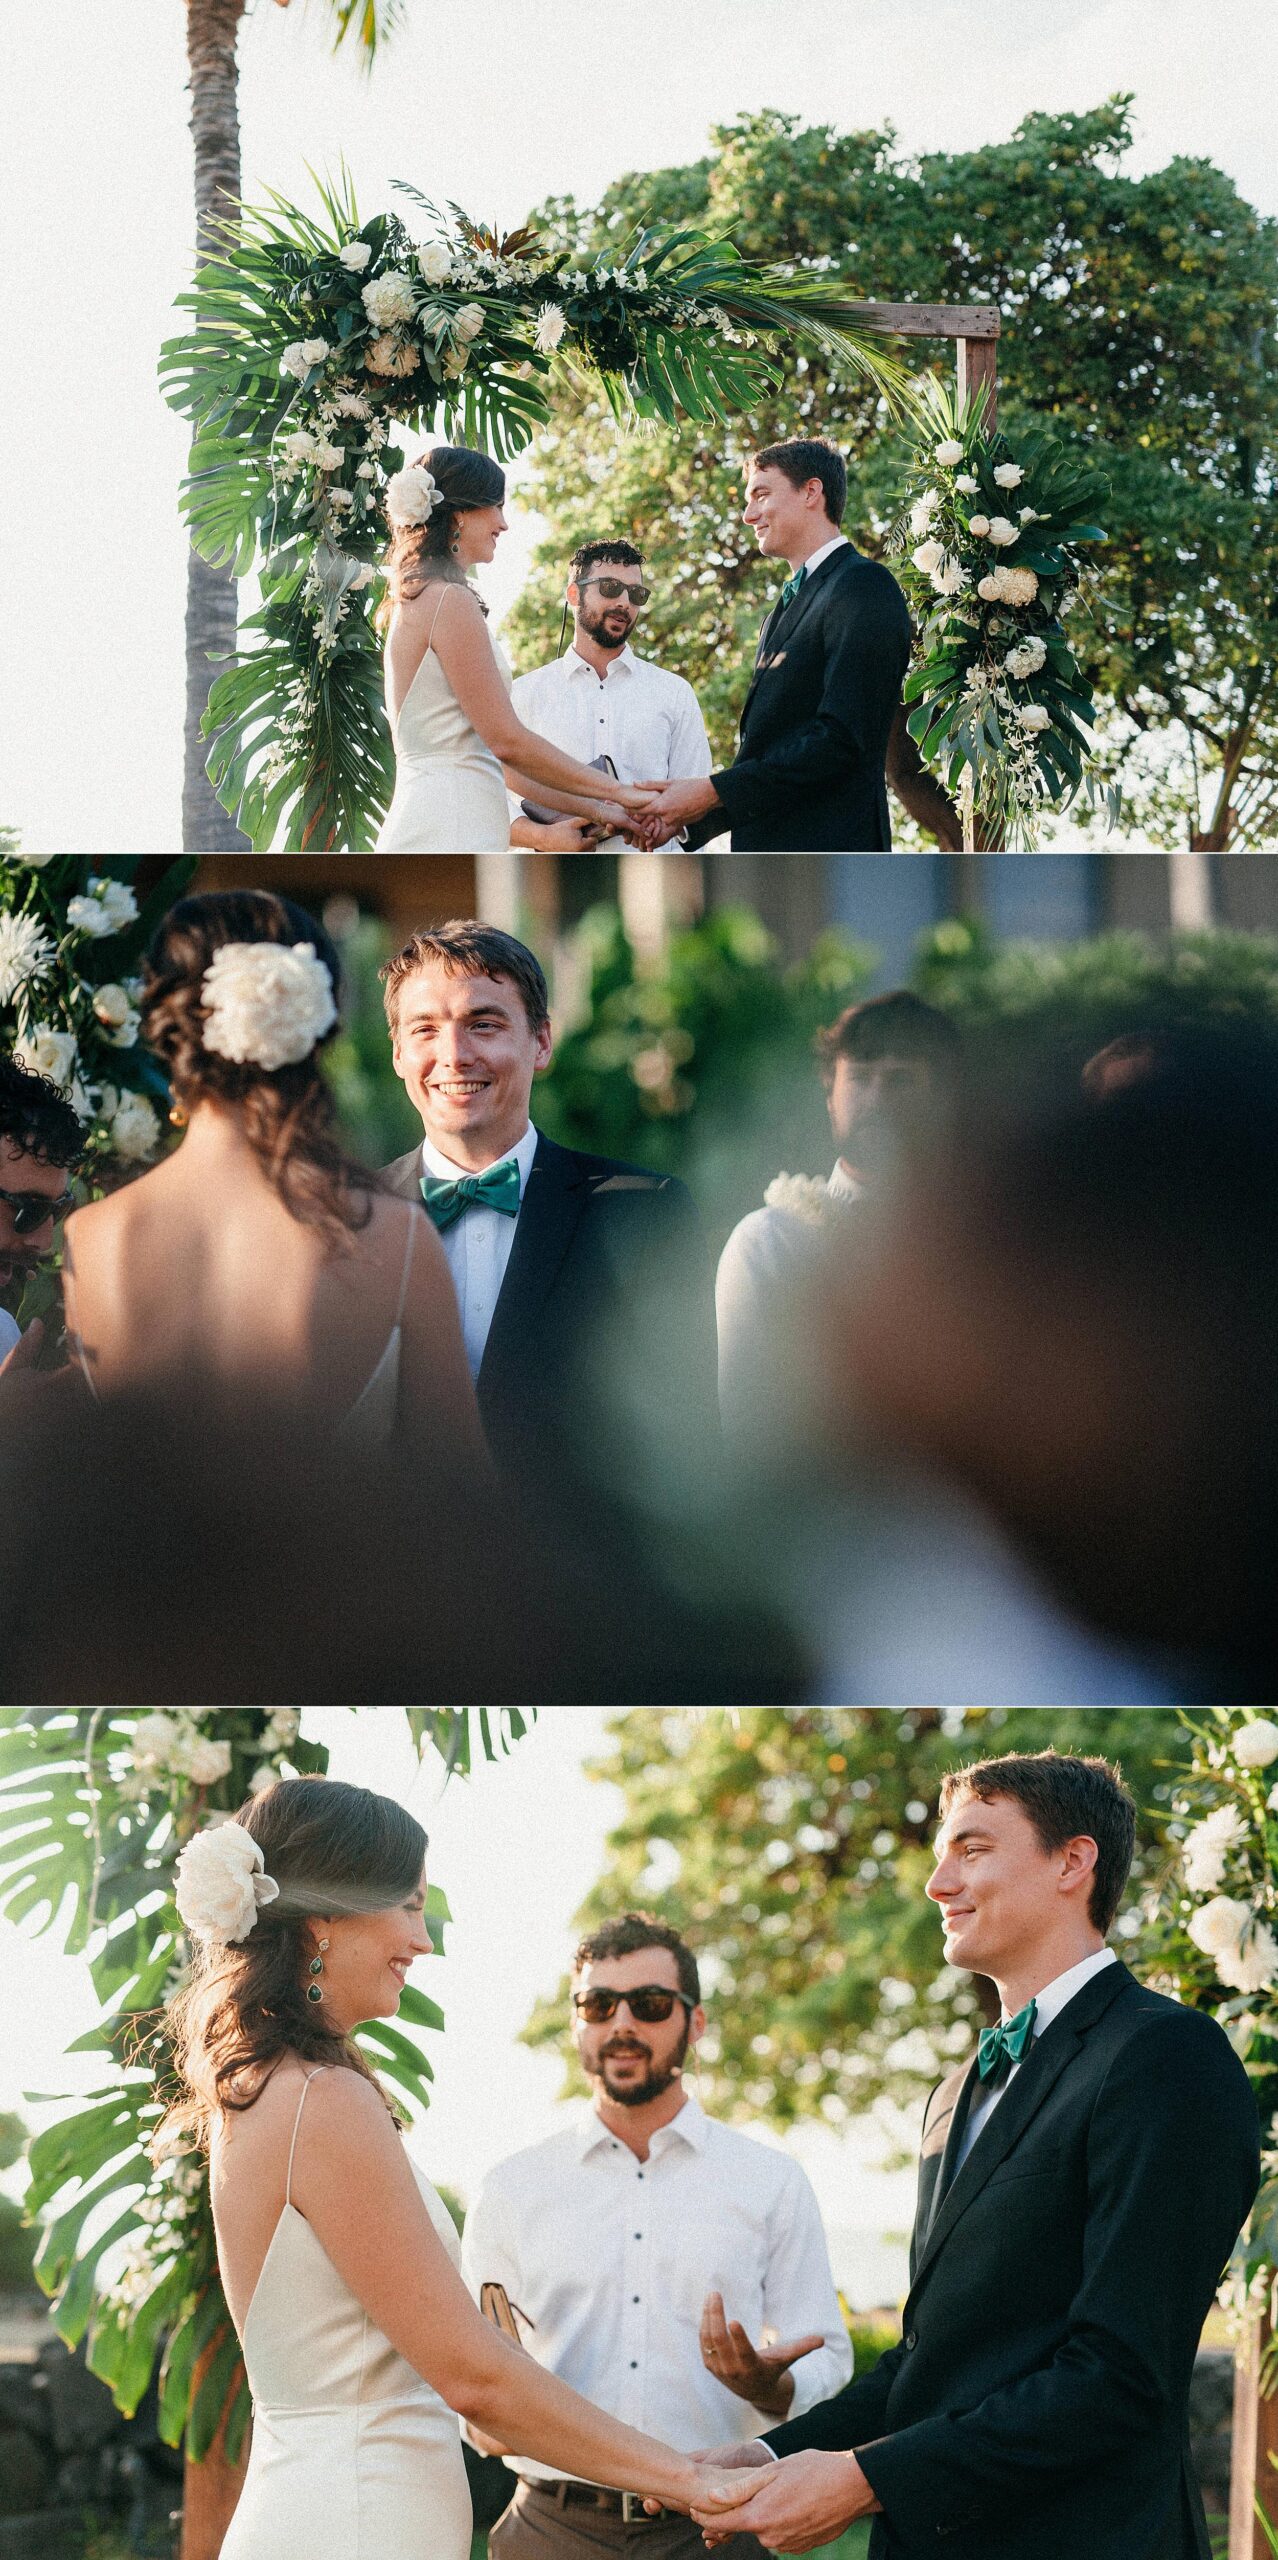 Kona-Big-Island-Hawaii-New-Years-Eve-Wedding-with-Ceremony-at-Living-Stones-Church-and-Reception-at-Daylight-Mind-Coffee_0013.jpg